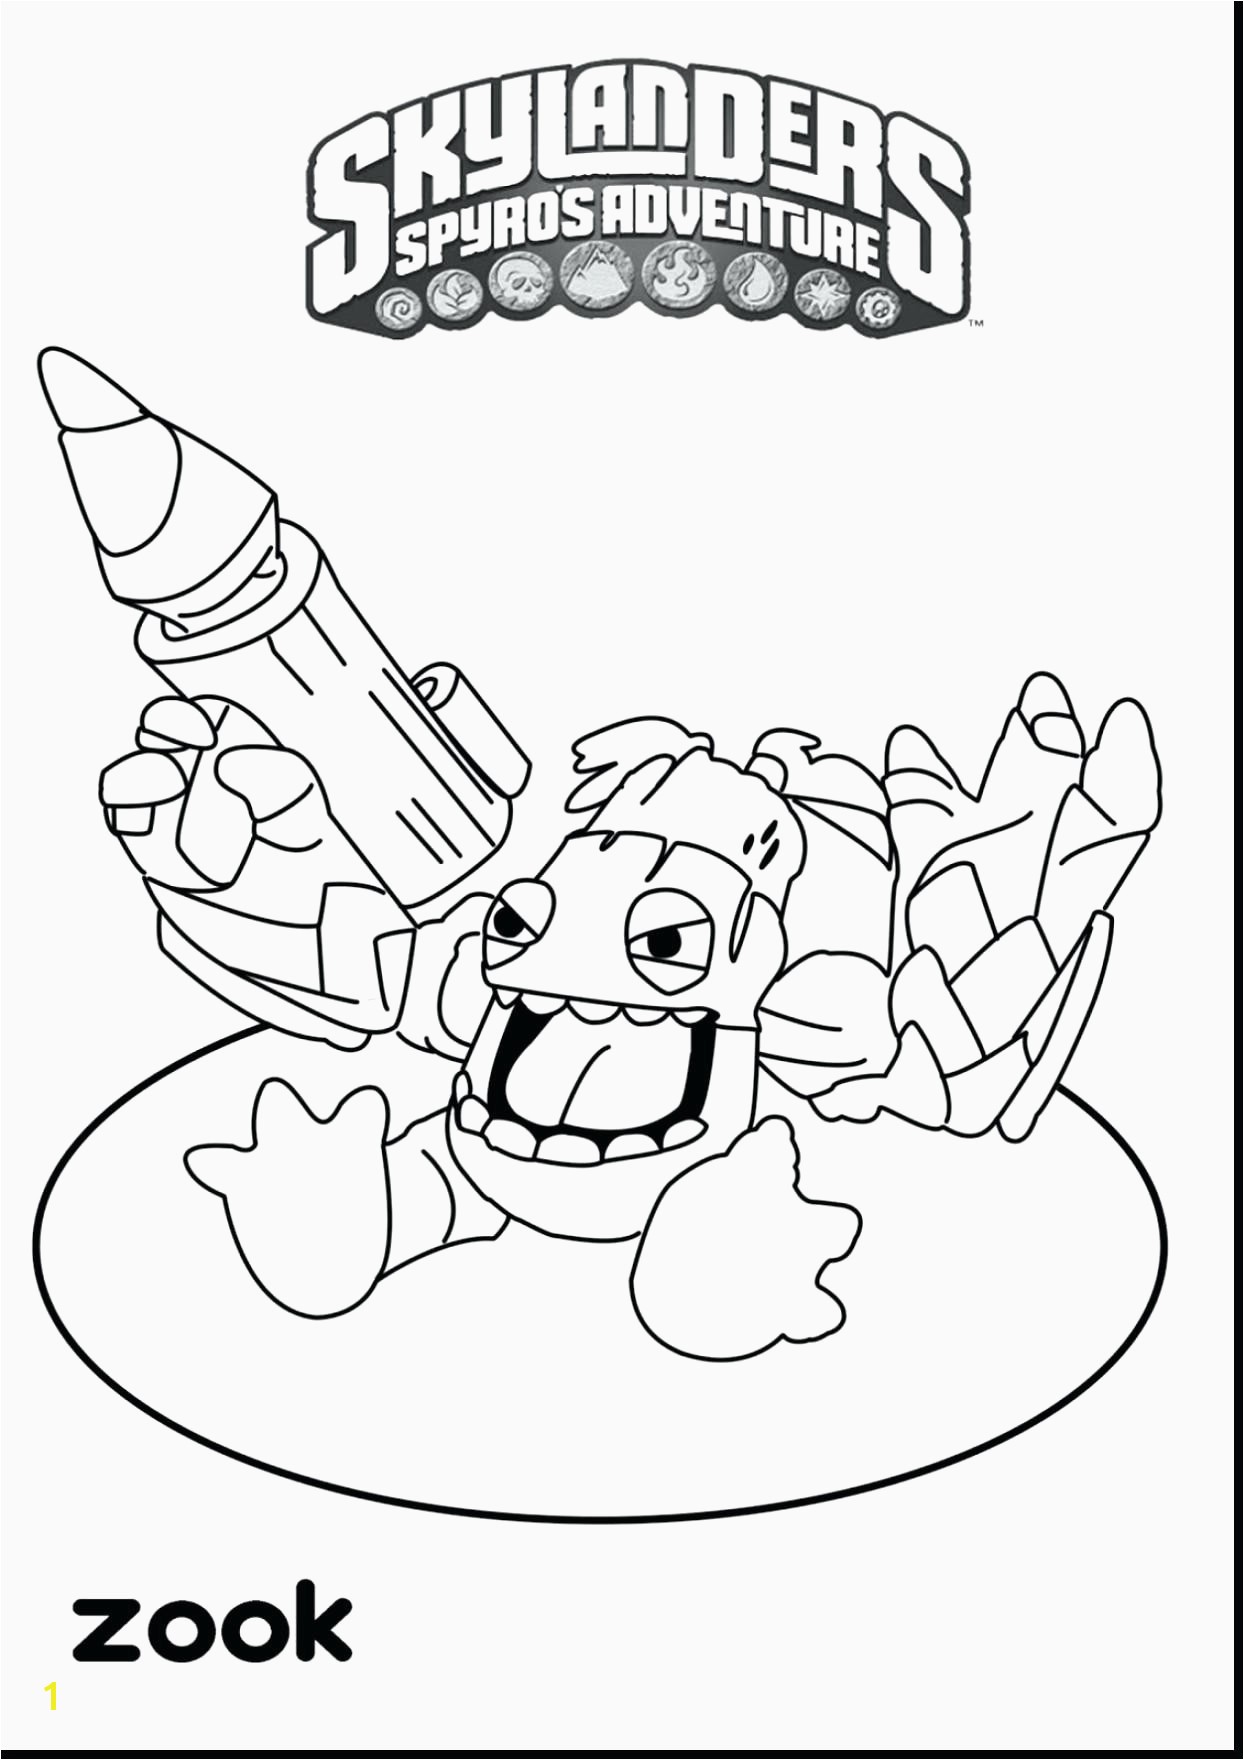 Christmas Elf Coloring Pages Free Awesome Coloring Skylander Giants Coloring Pages O D Colouring